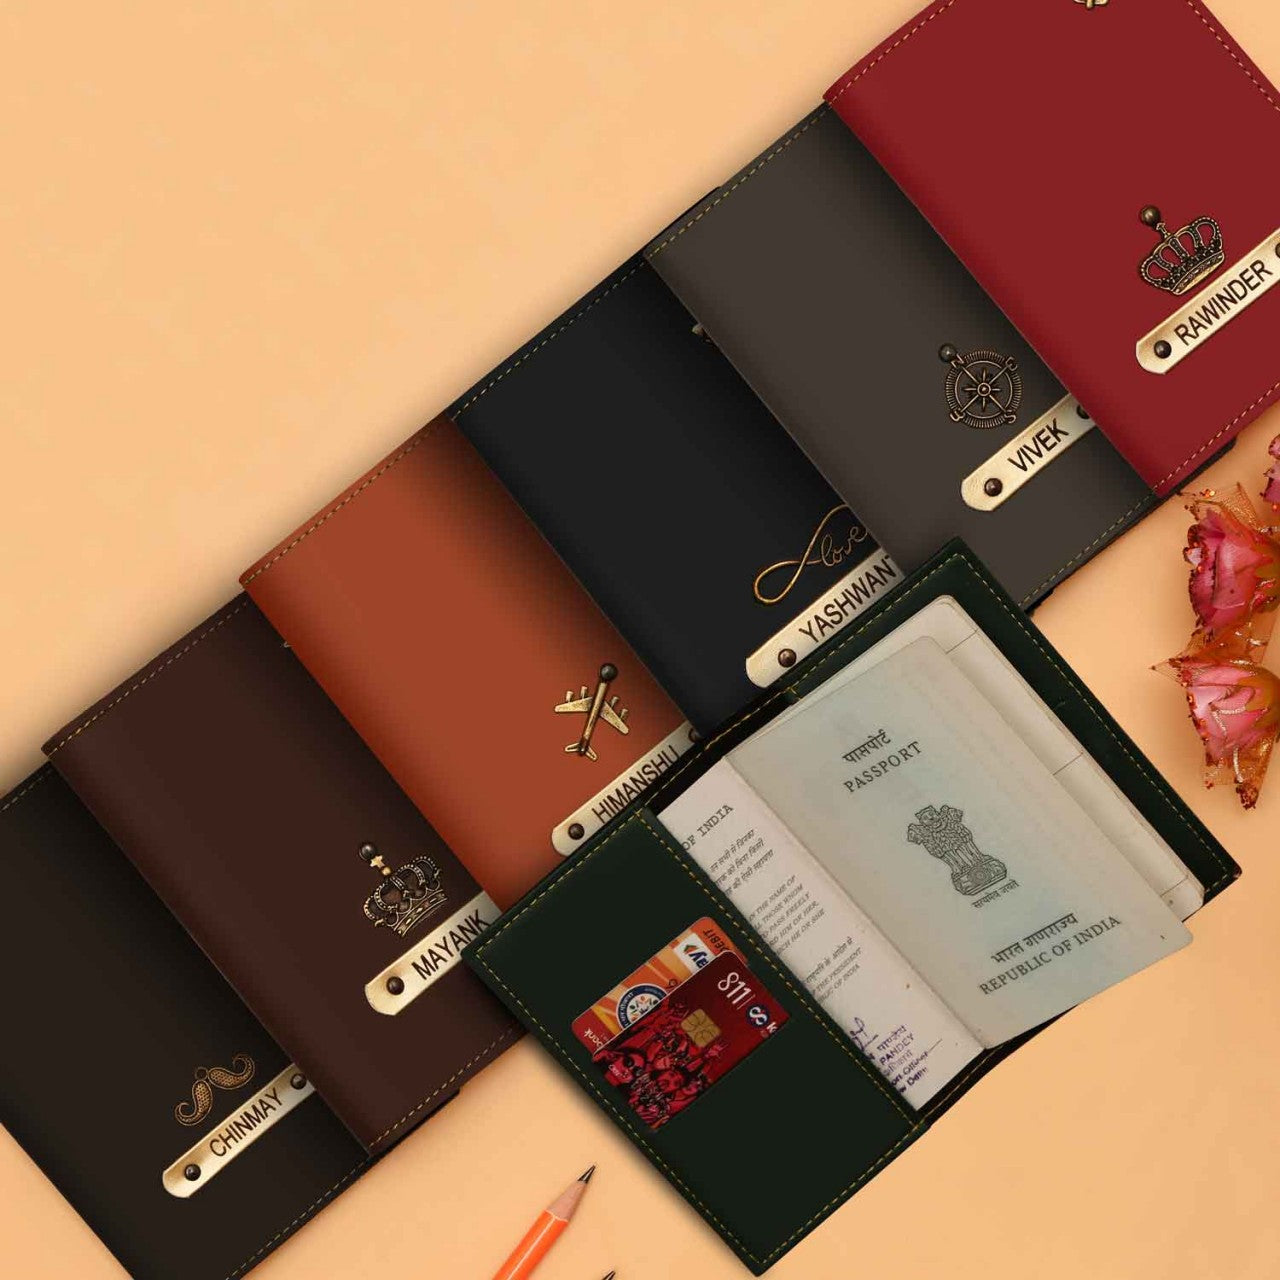 Personalized Leather Passport Covers For Couple